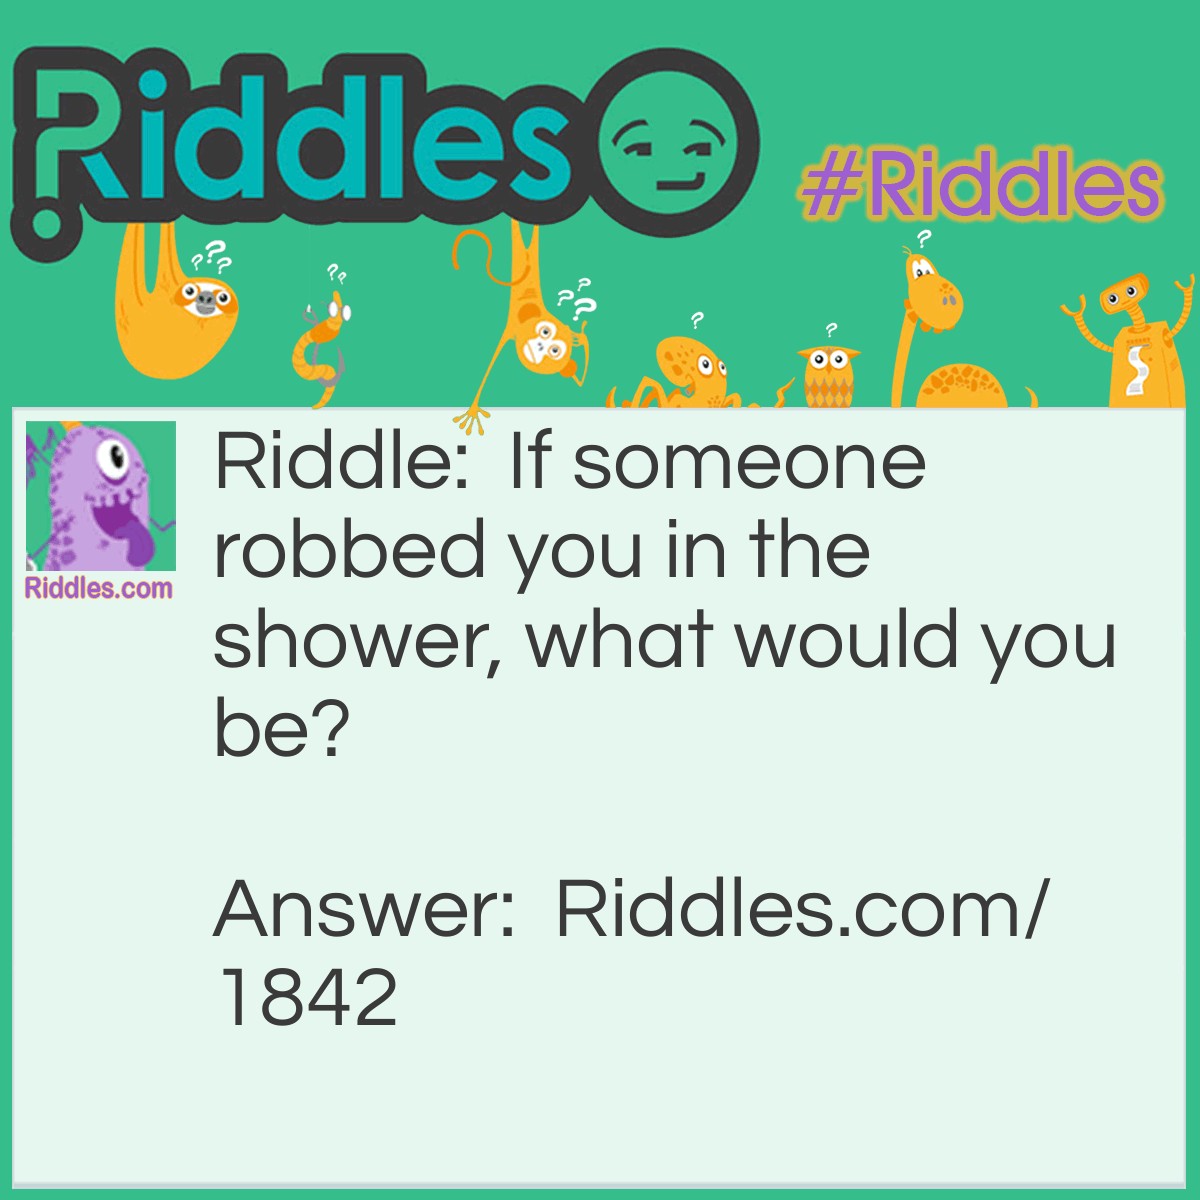 Riddle: If someone robbed you in the shower, what would you be? Answer: An eye wetness.